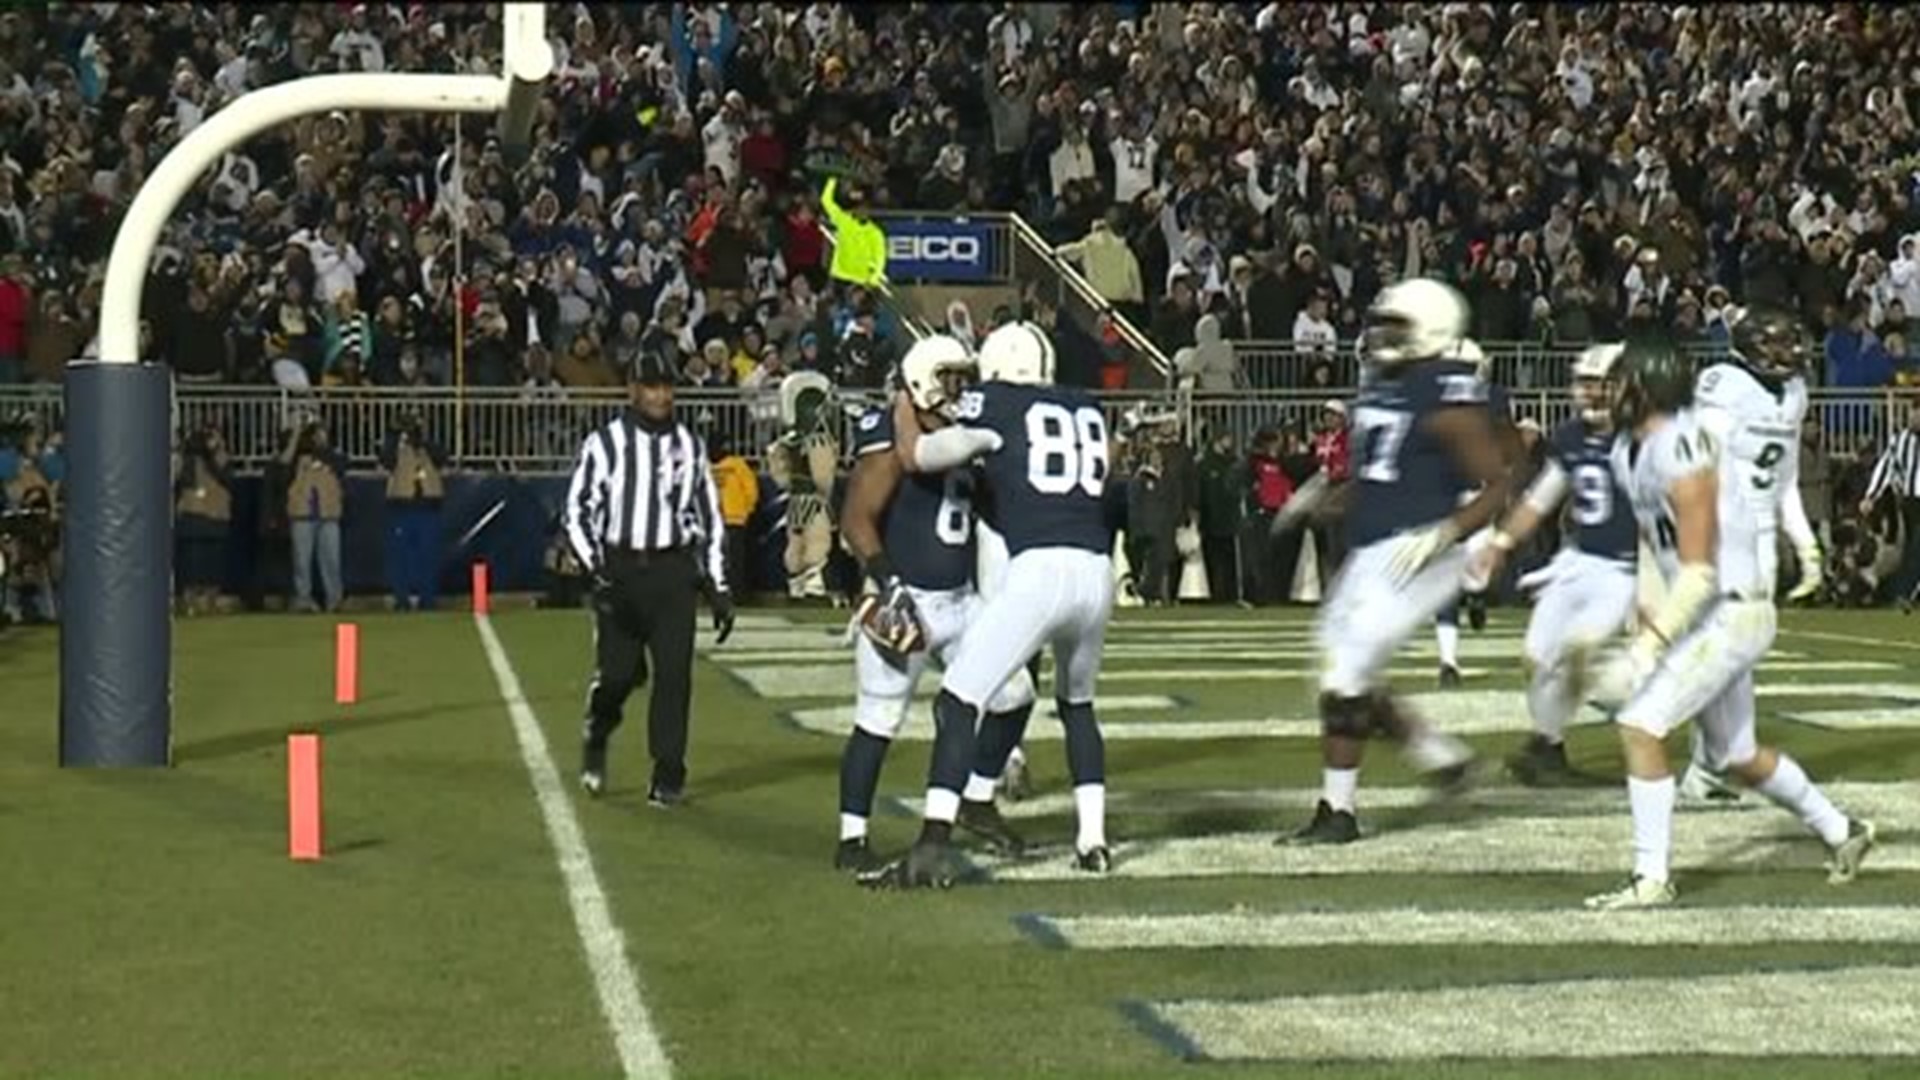 Penn State Fans Plan for Big Games